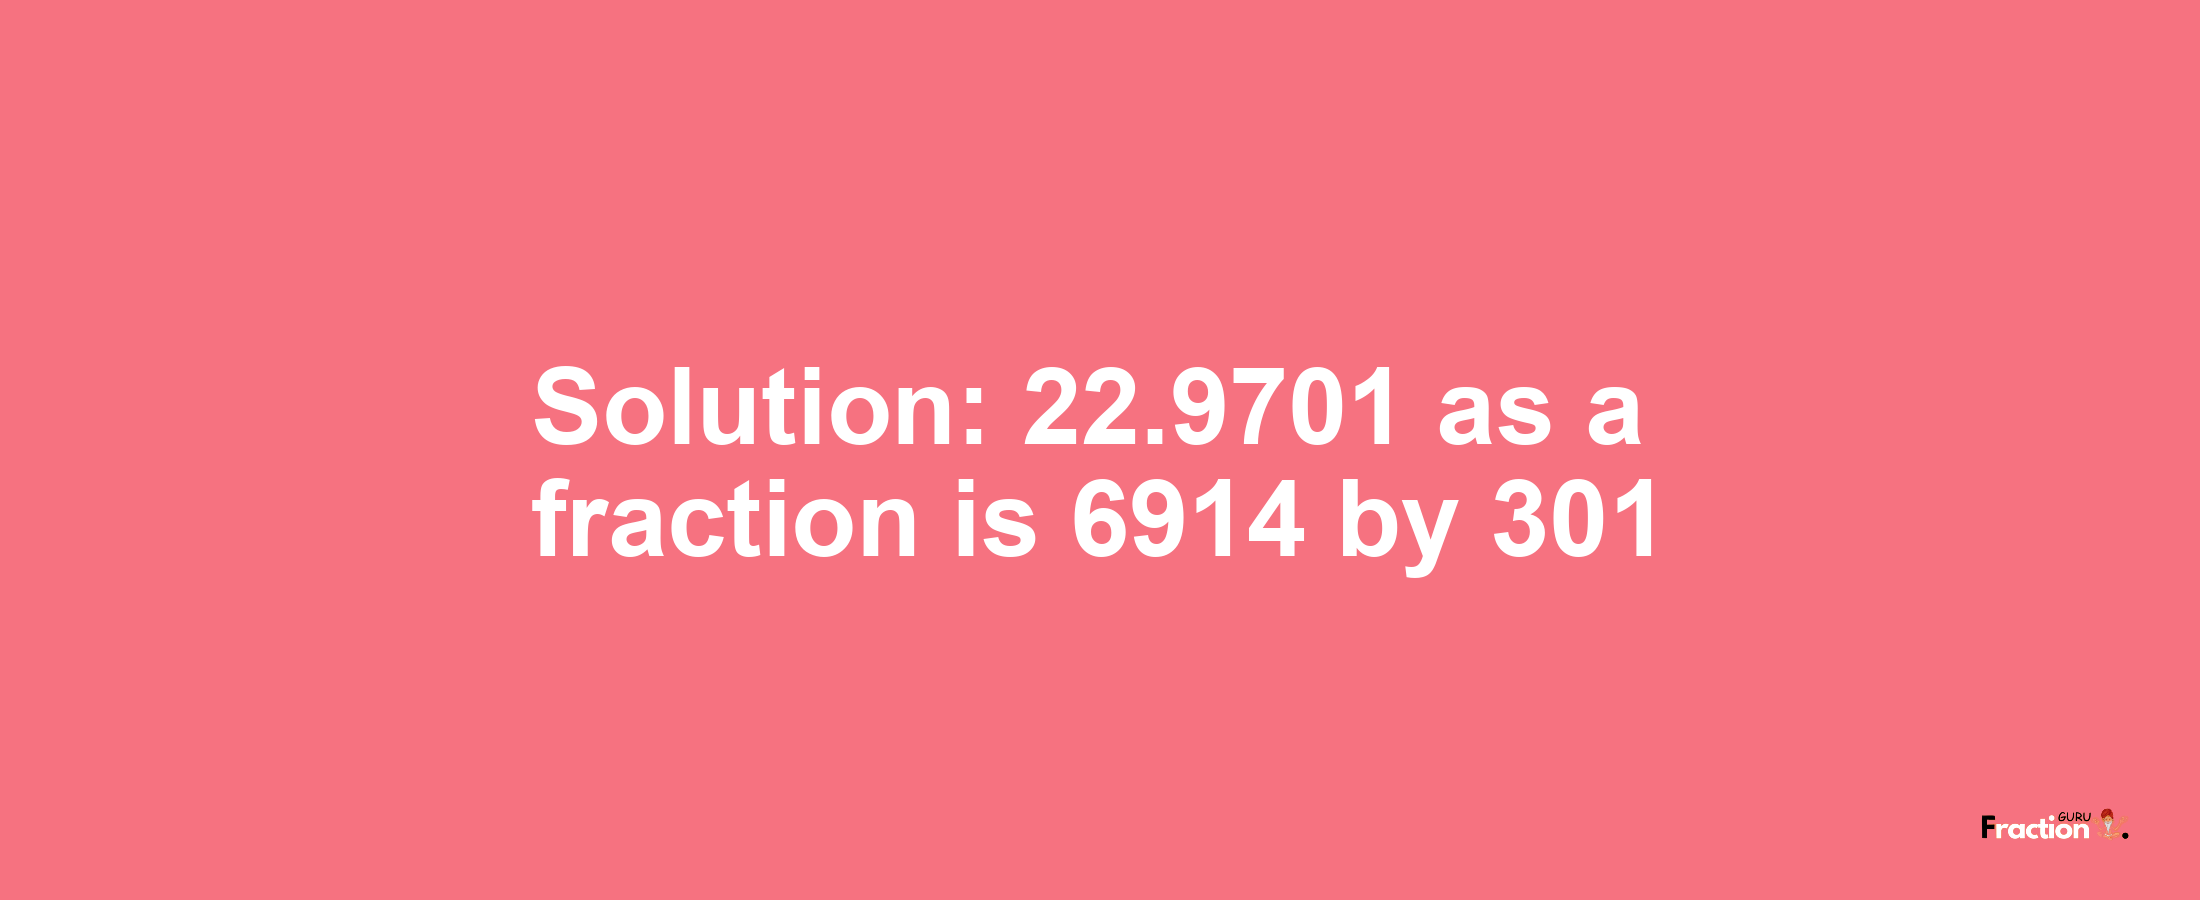 Solution:22.9701 as a fraction is 6914/301